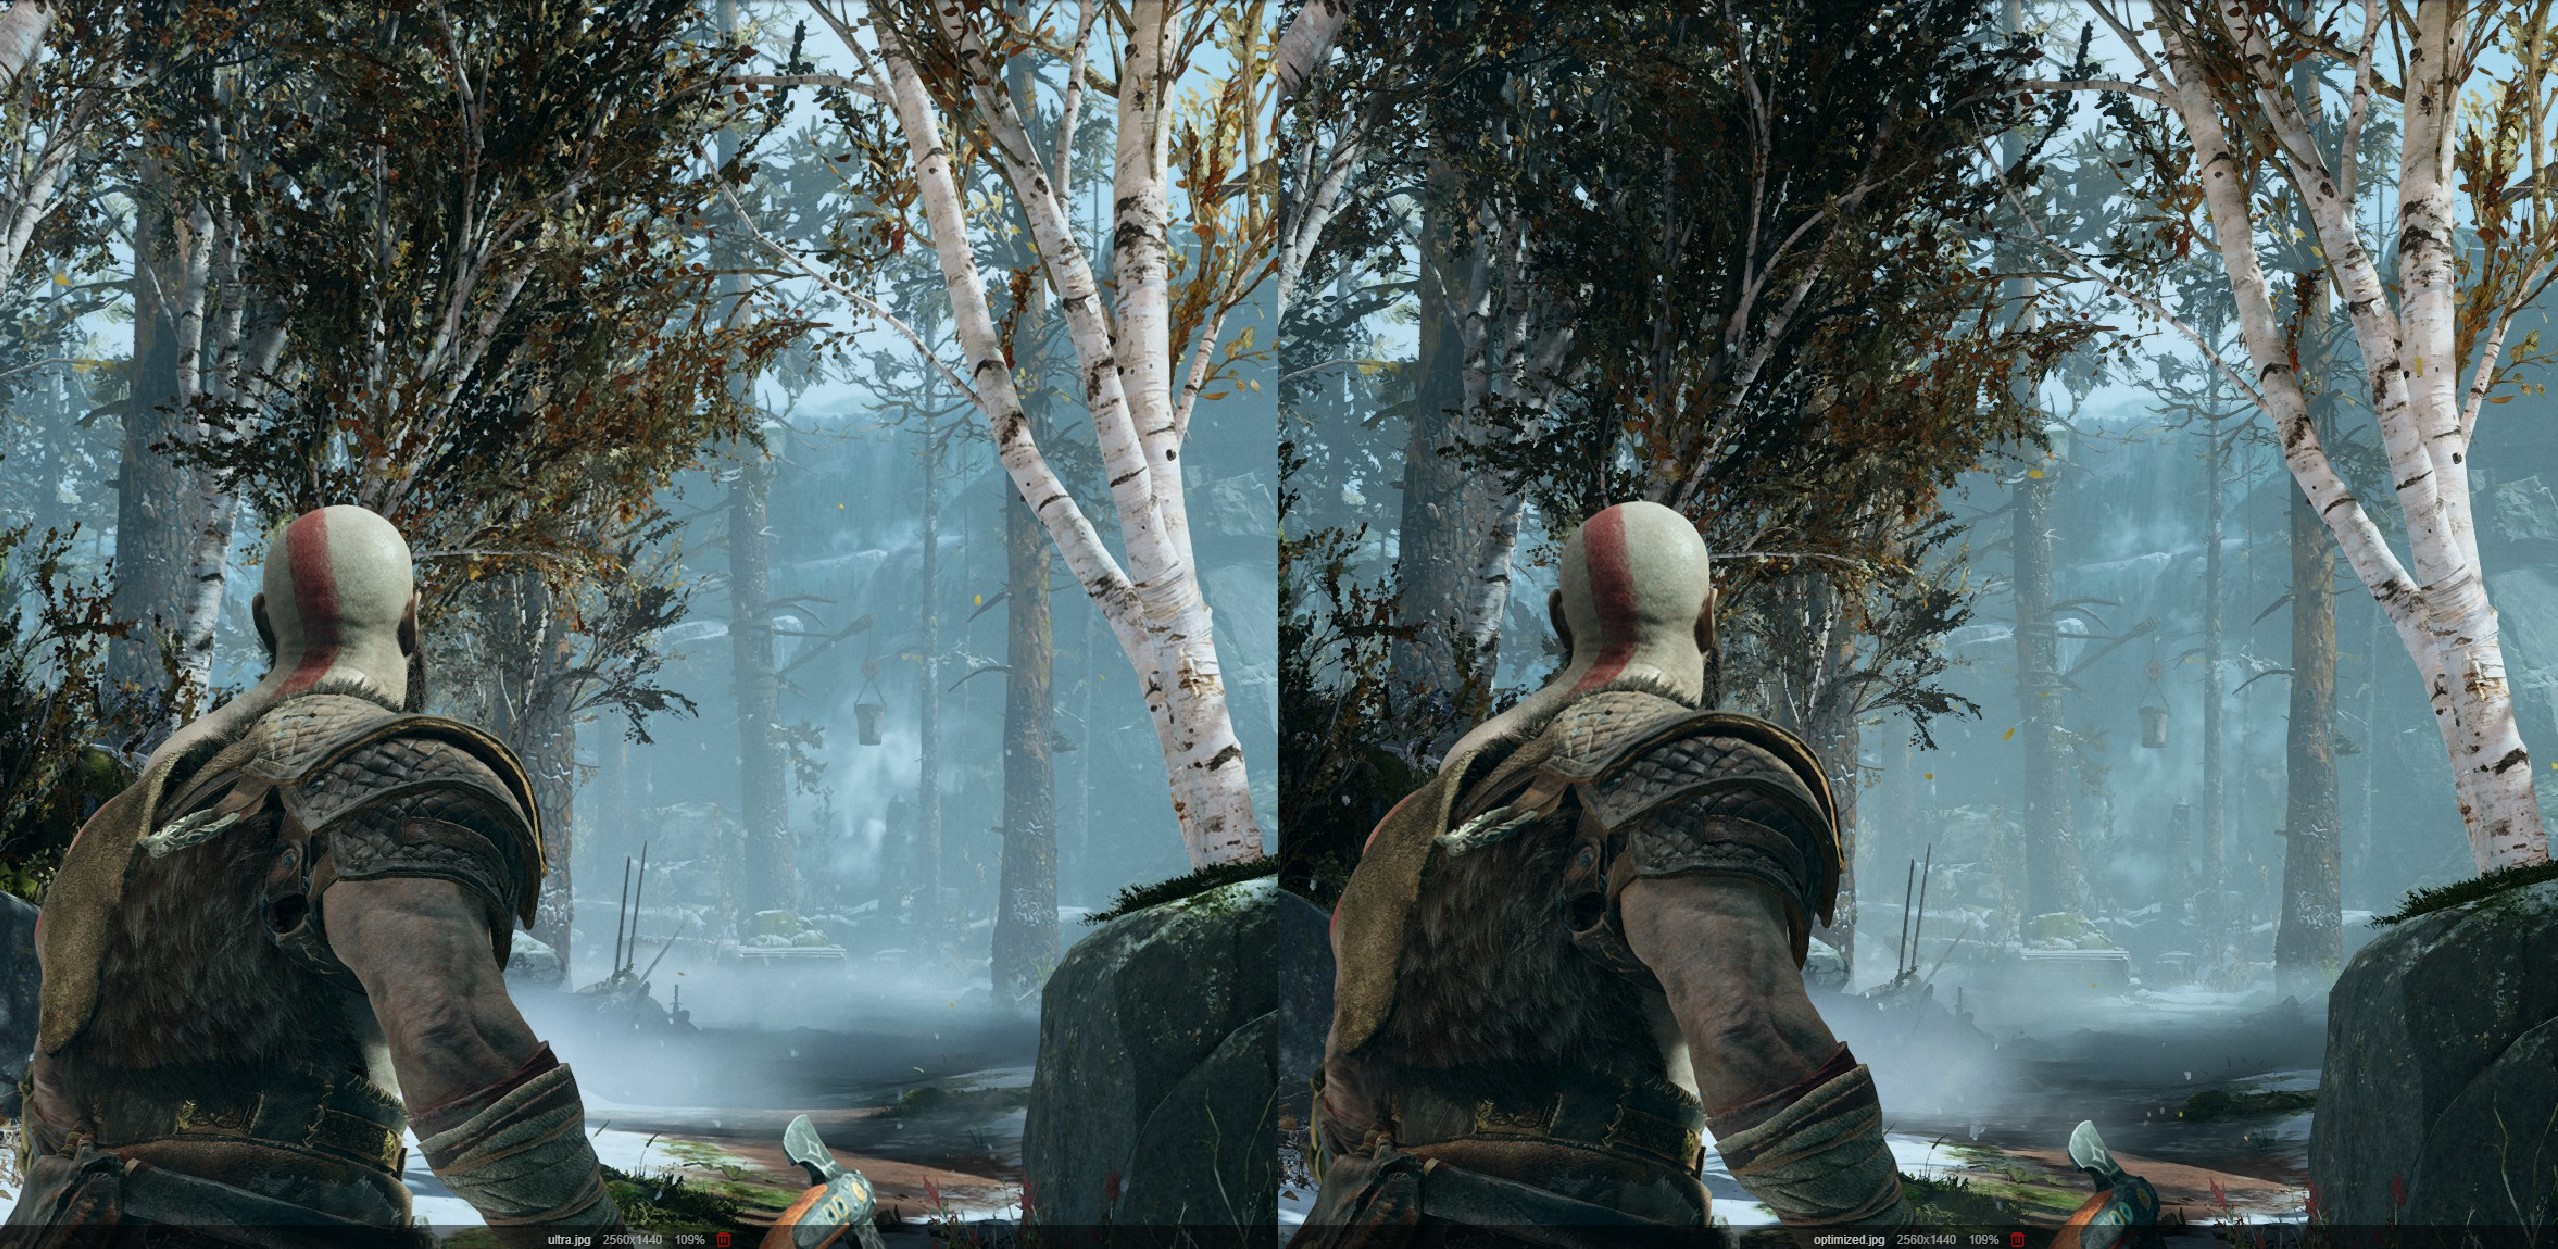 God of War PC performance: The best settings for high FPS